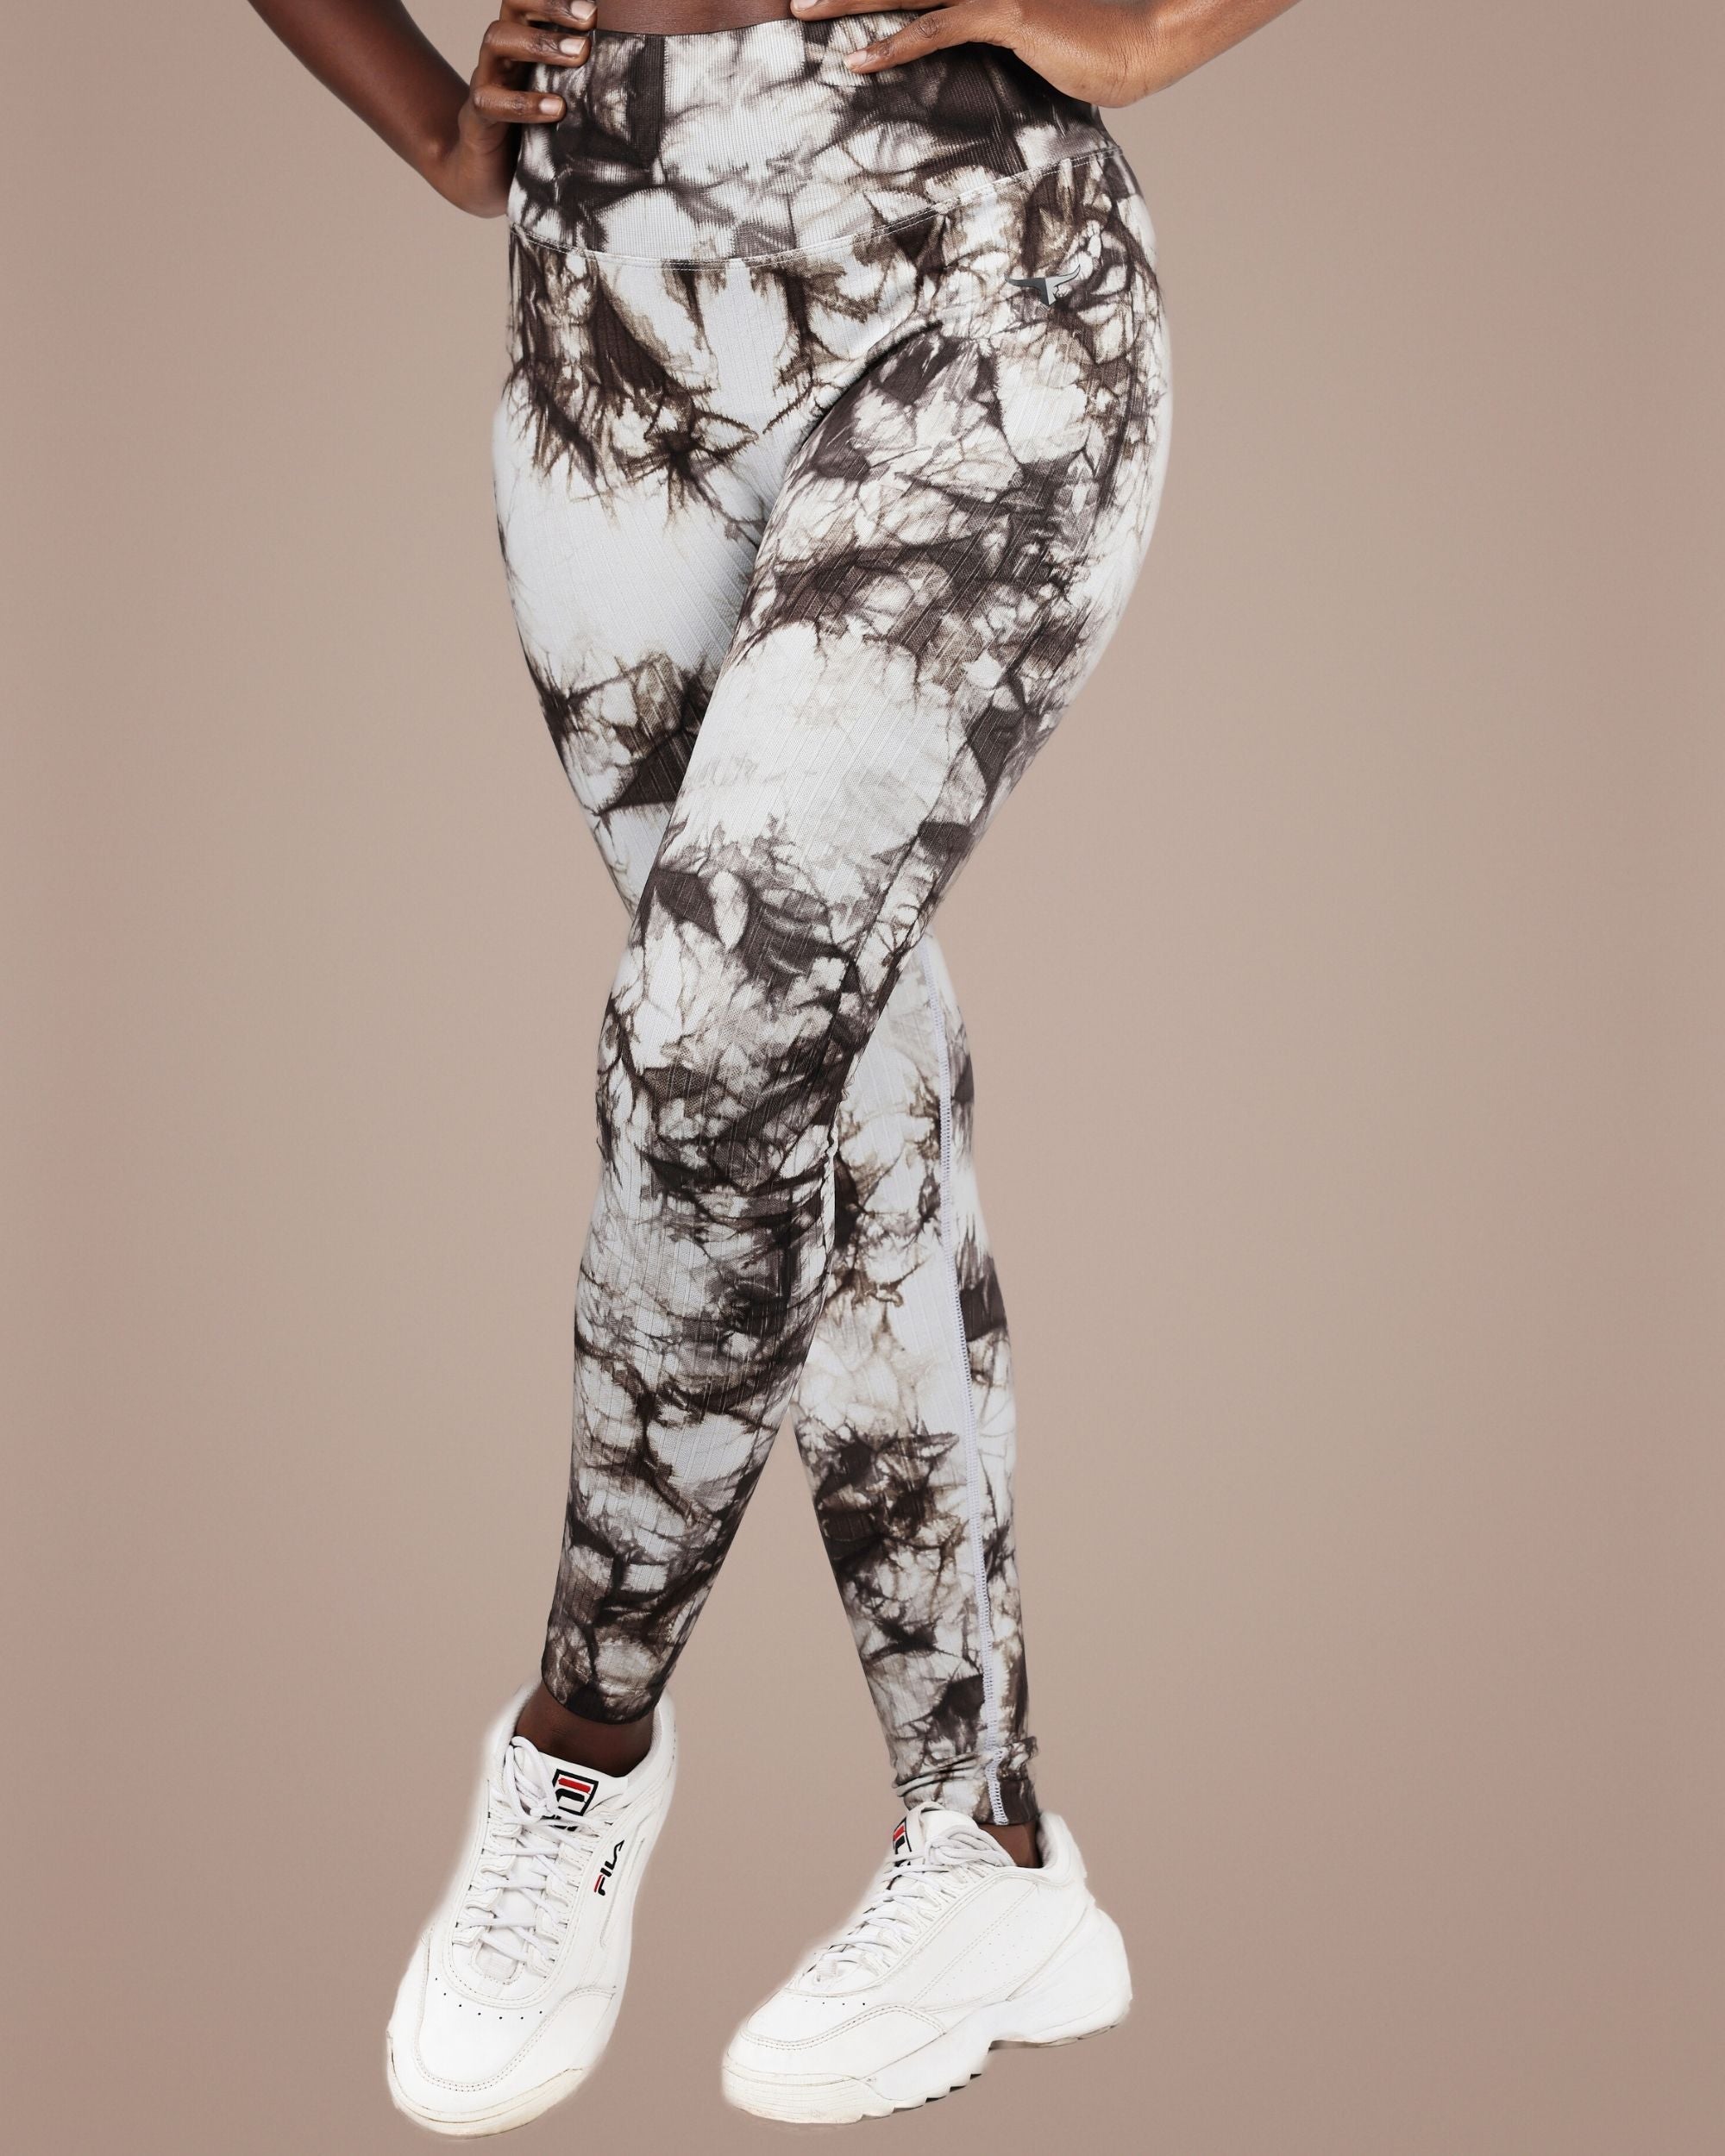 THUGFIT FunkyHues Performance-Stride Fitness Leggings -Grey - THUGFIT